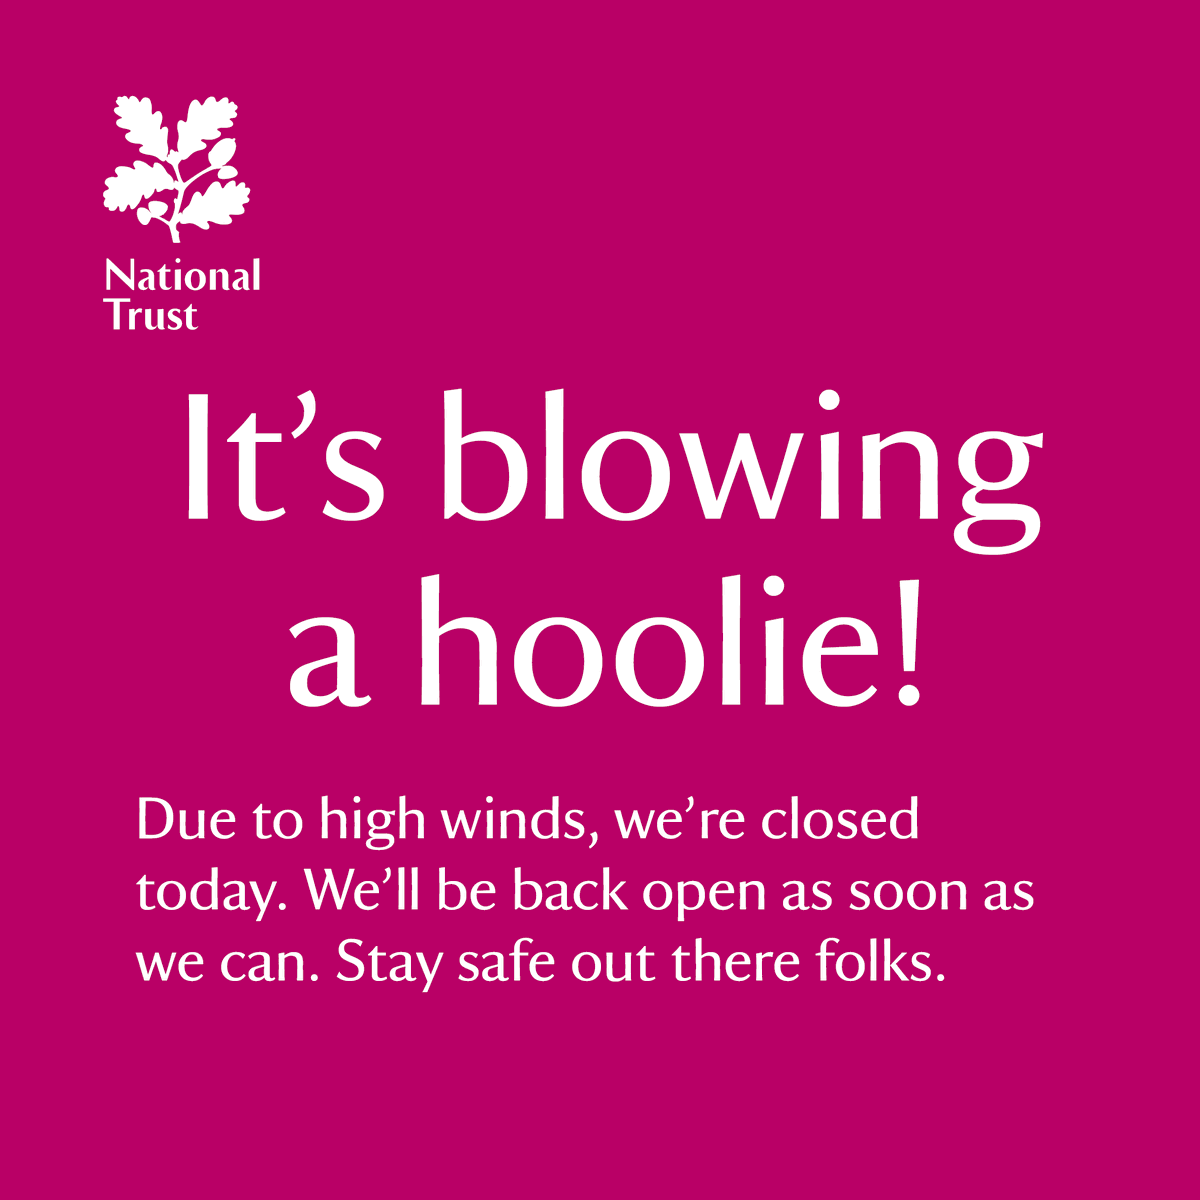 Due to high winds, Hidcote has had to close early today, Monday 15 April. Thank you for your understanding.